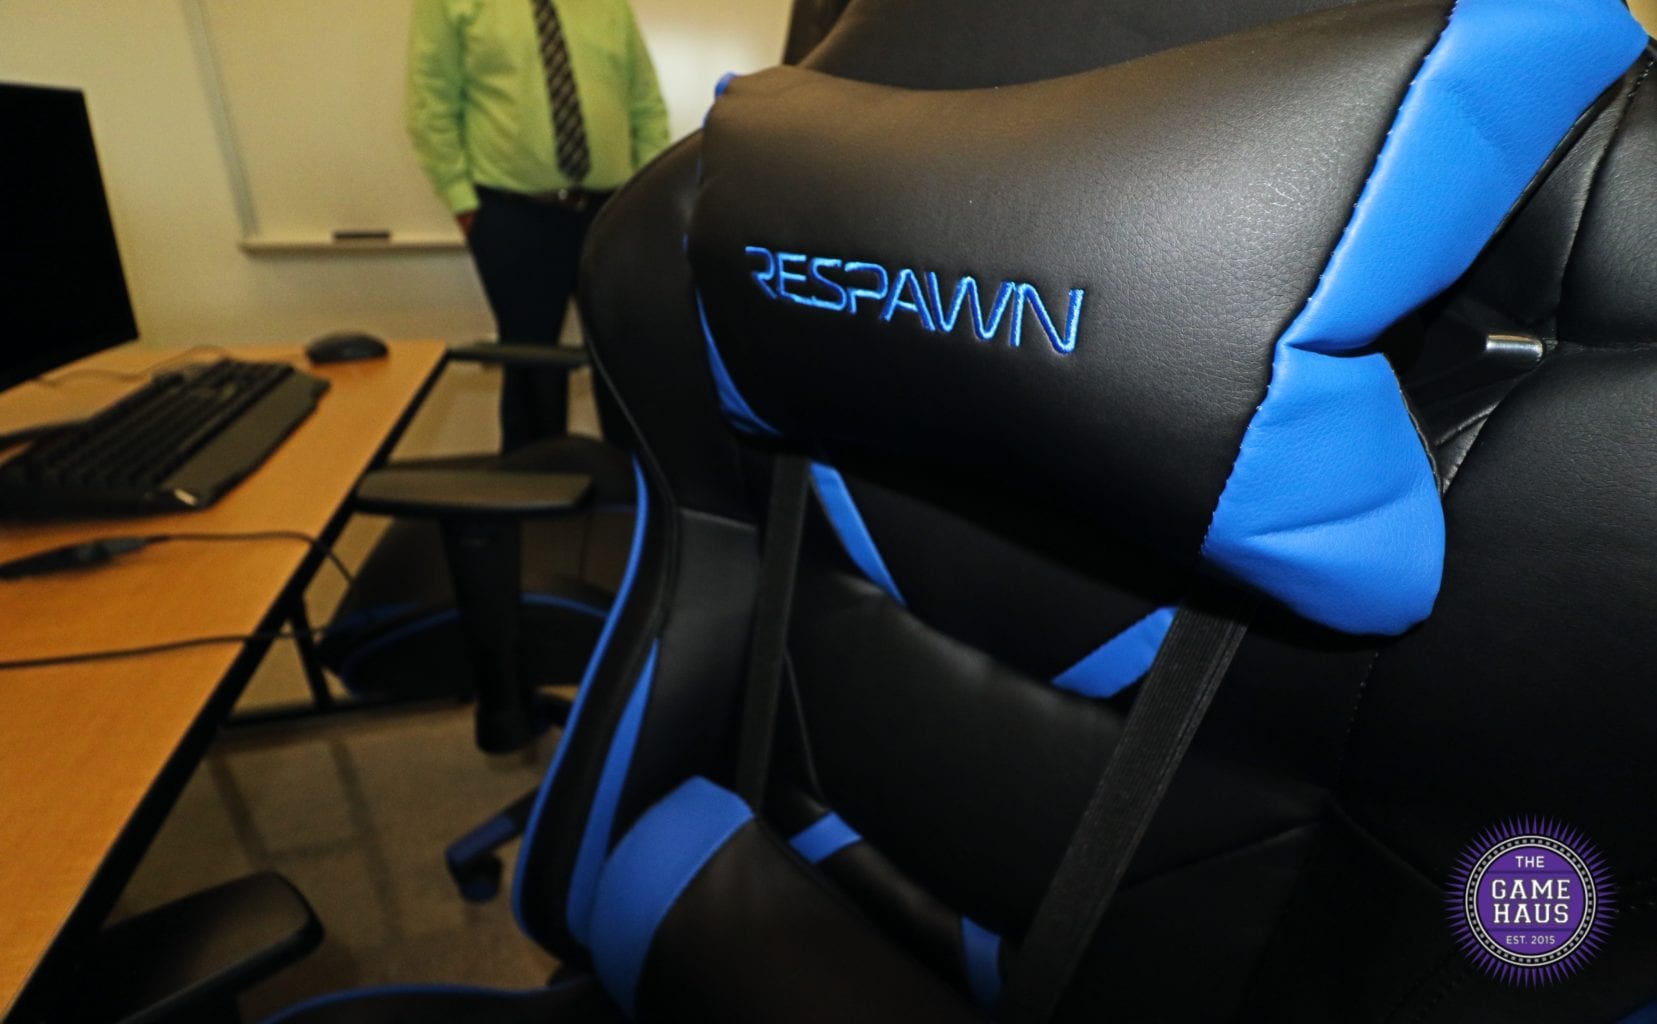 The LCHS esports lab also has professional gaming chairs (photo by Love Marketing Agency).